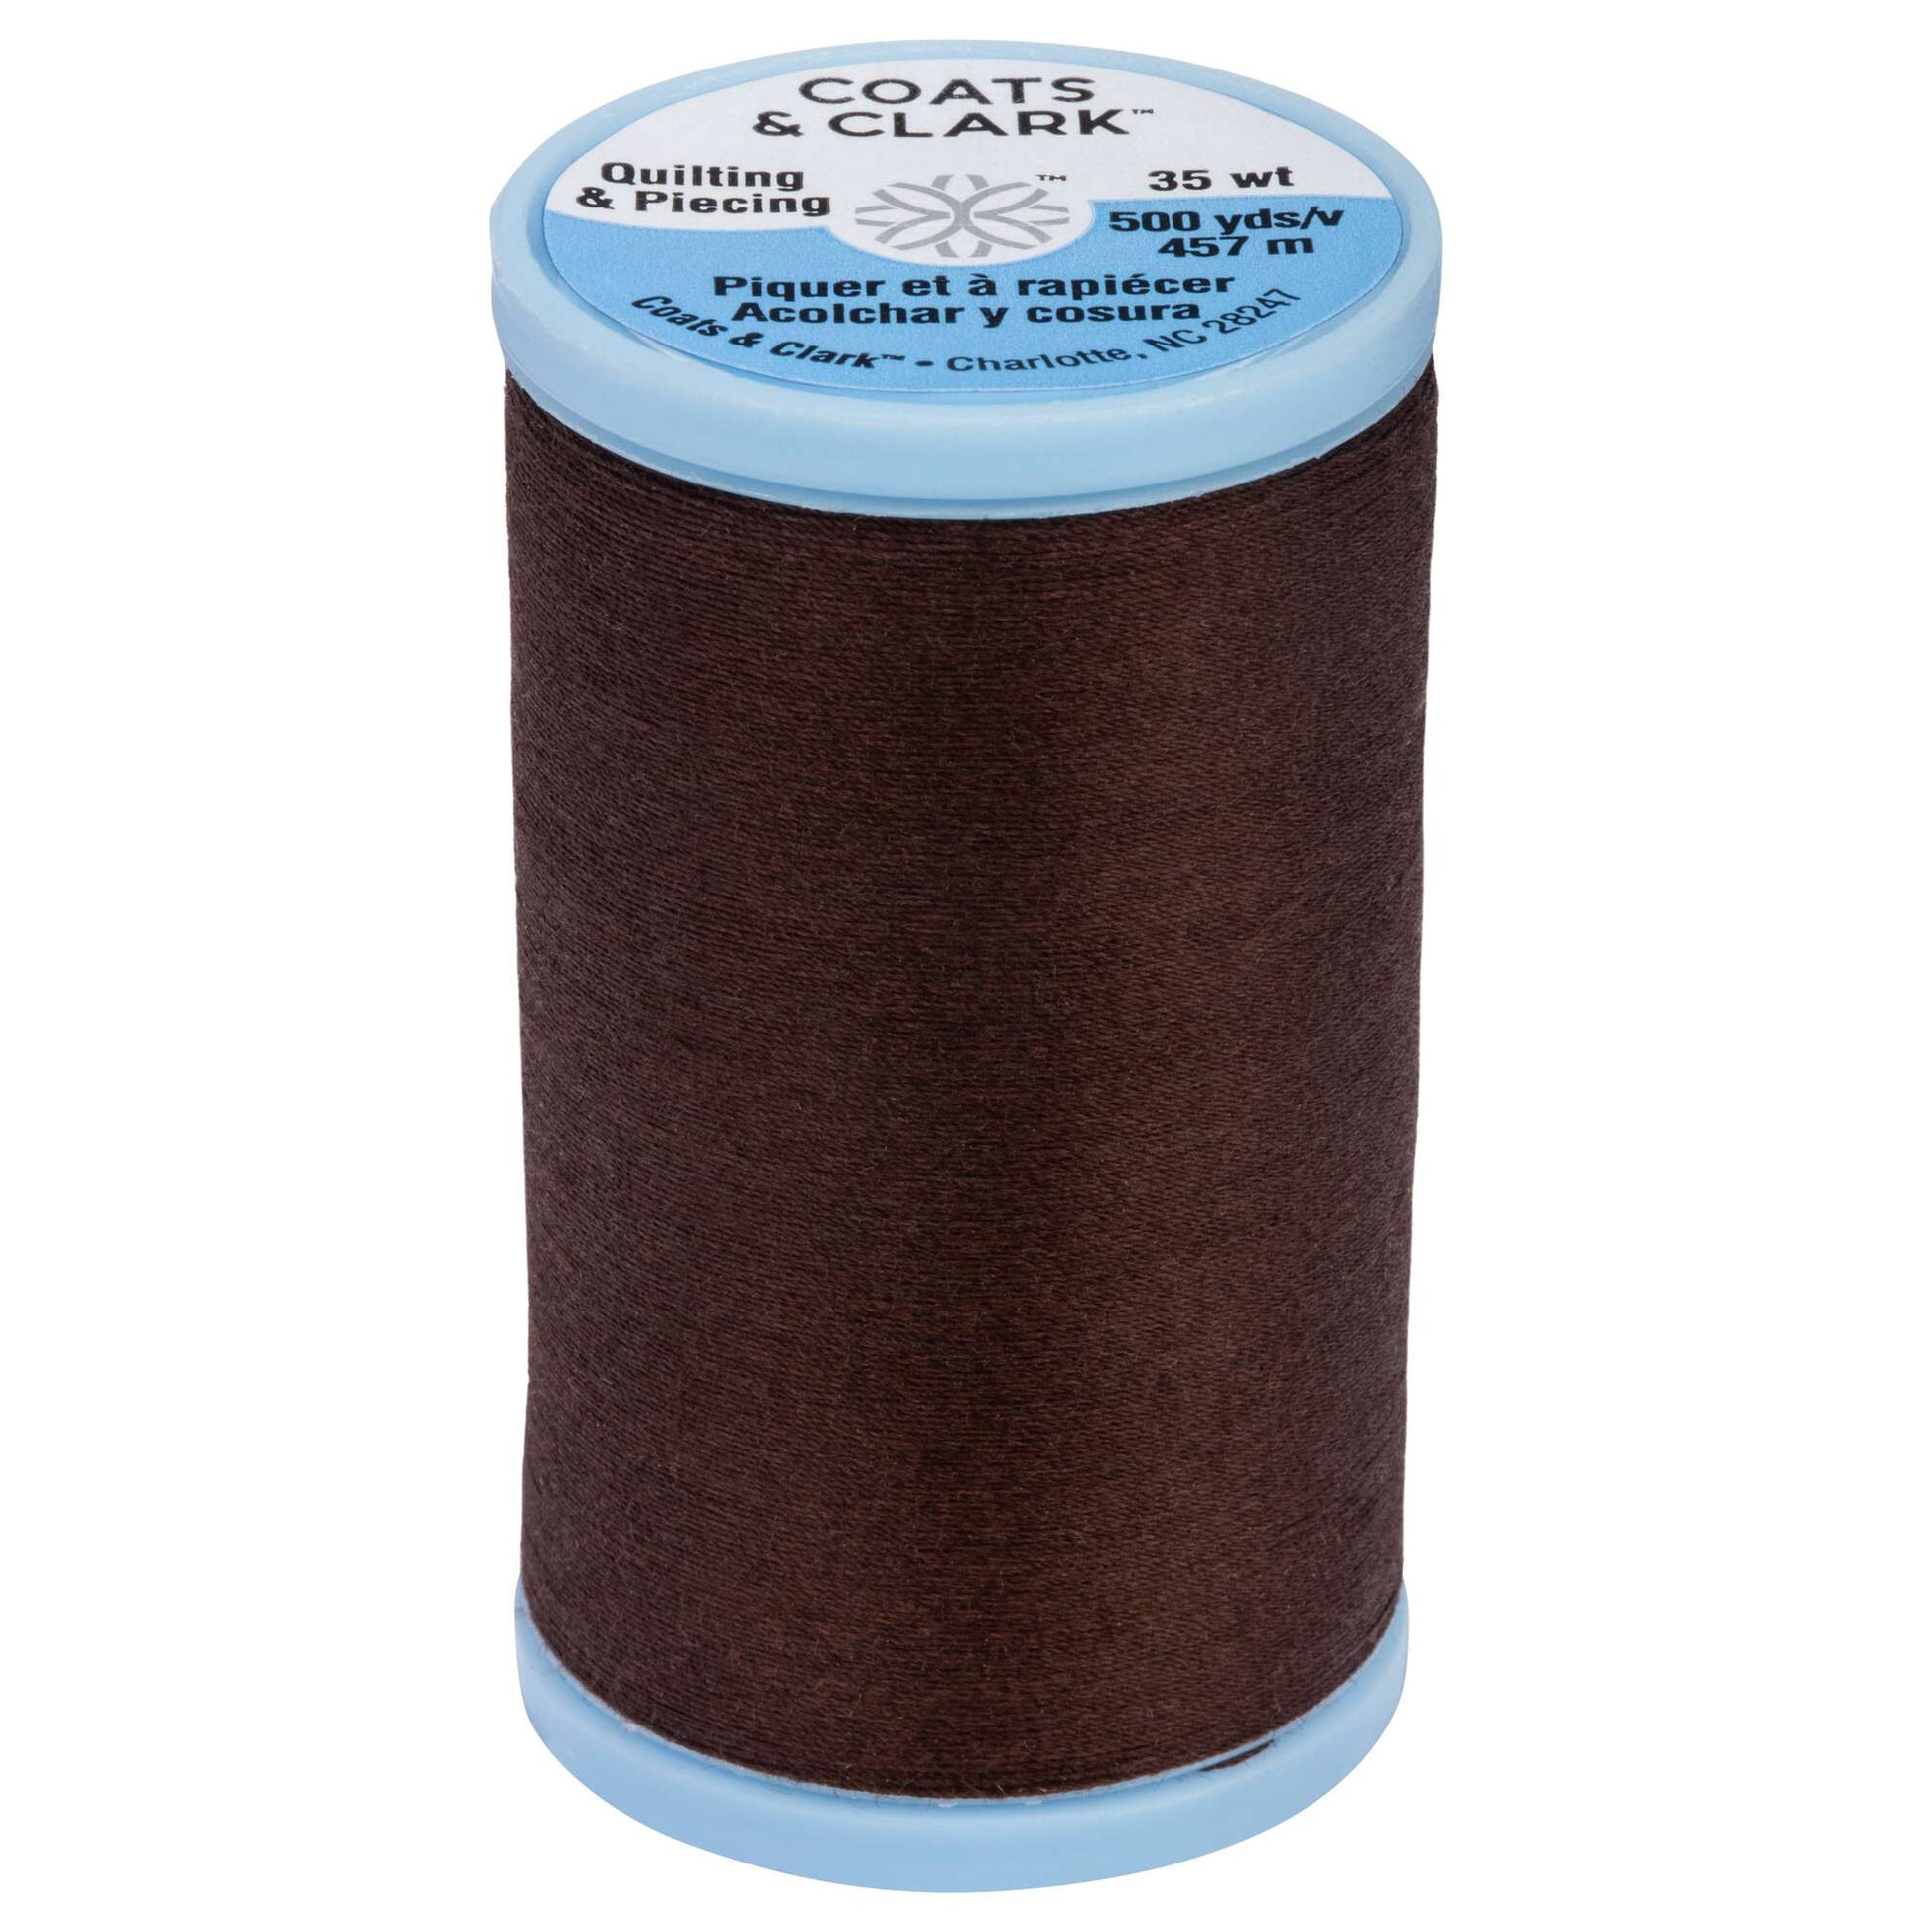 Coats & Clark Cotton Covered Quilting & Piecing Thread (500 Yards)